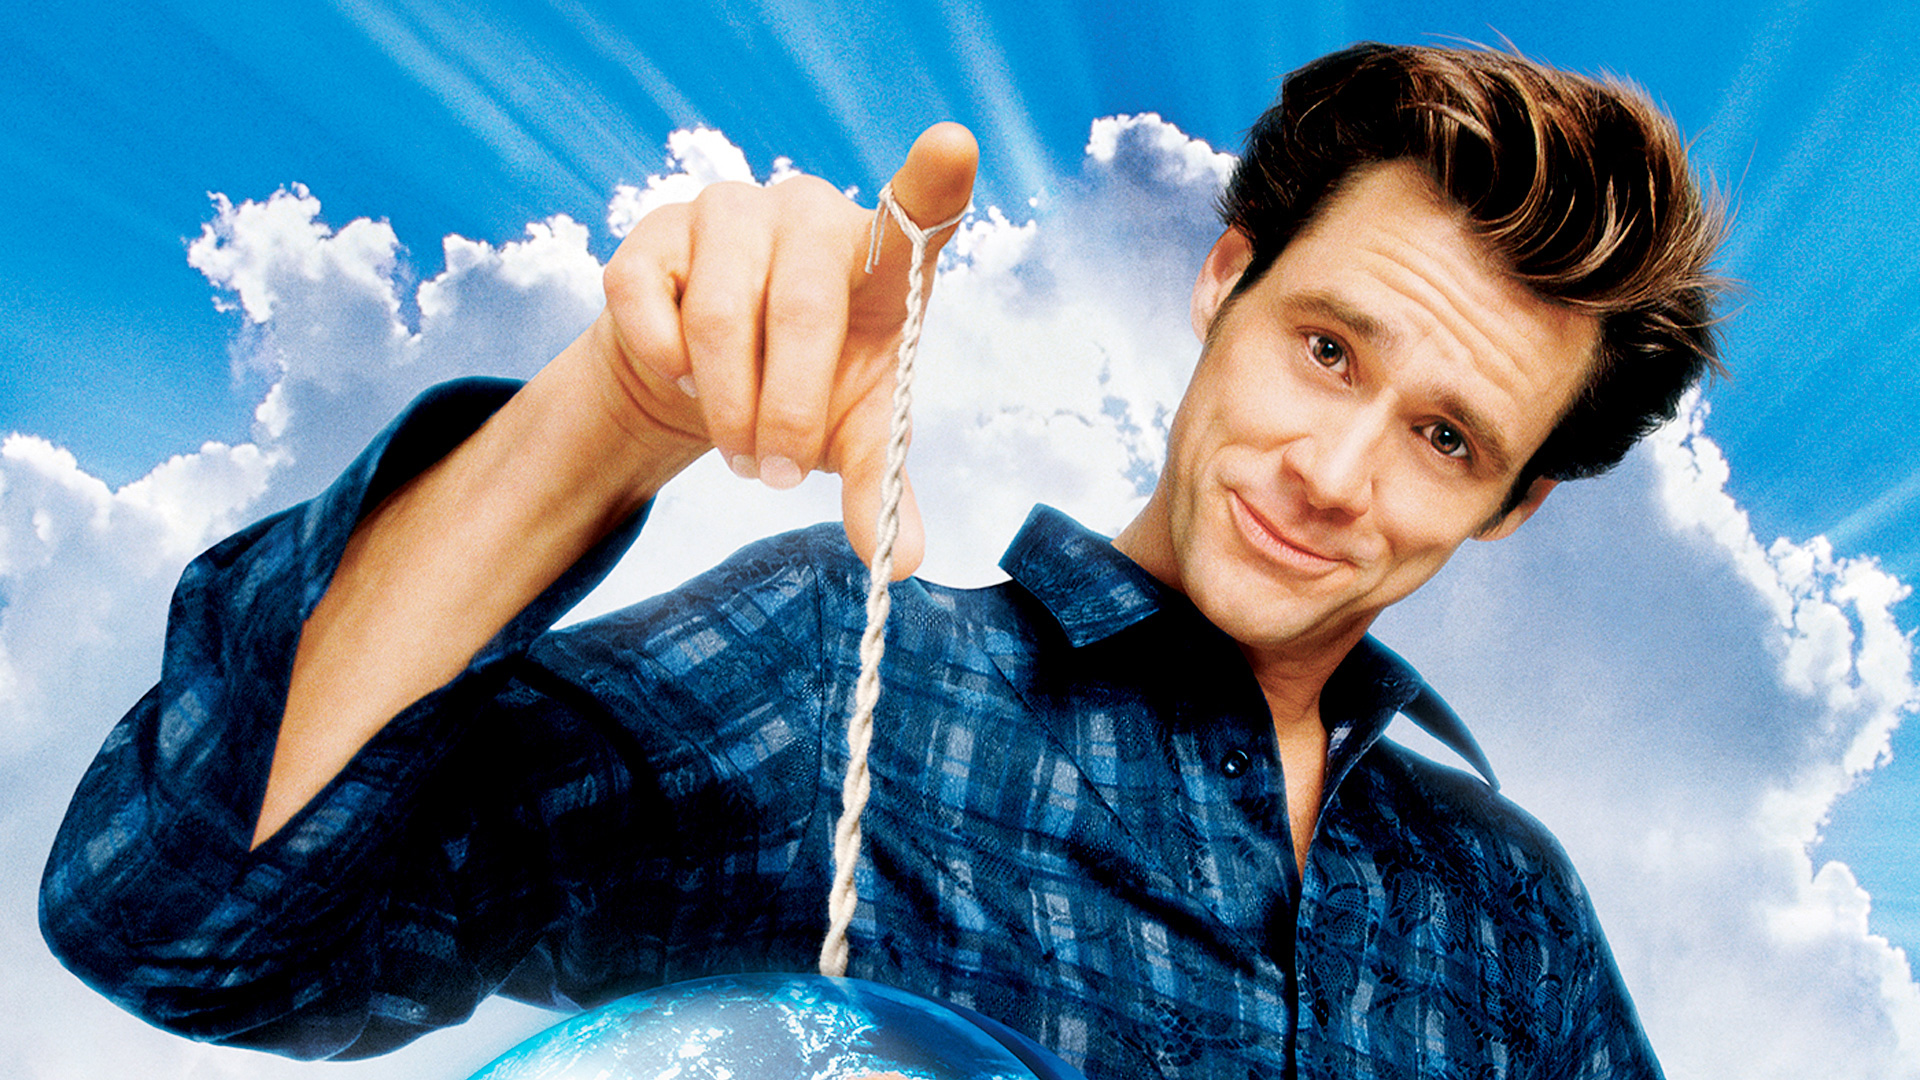 Bruce Almighty HD Wallpaper Background Image 1920x1080